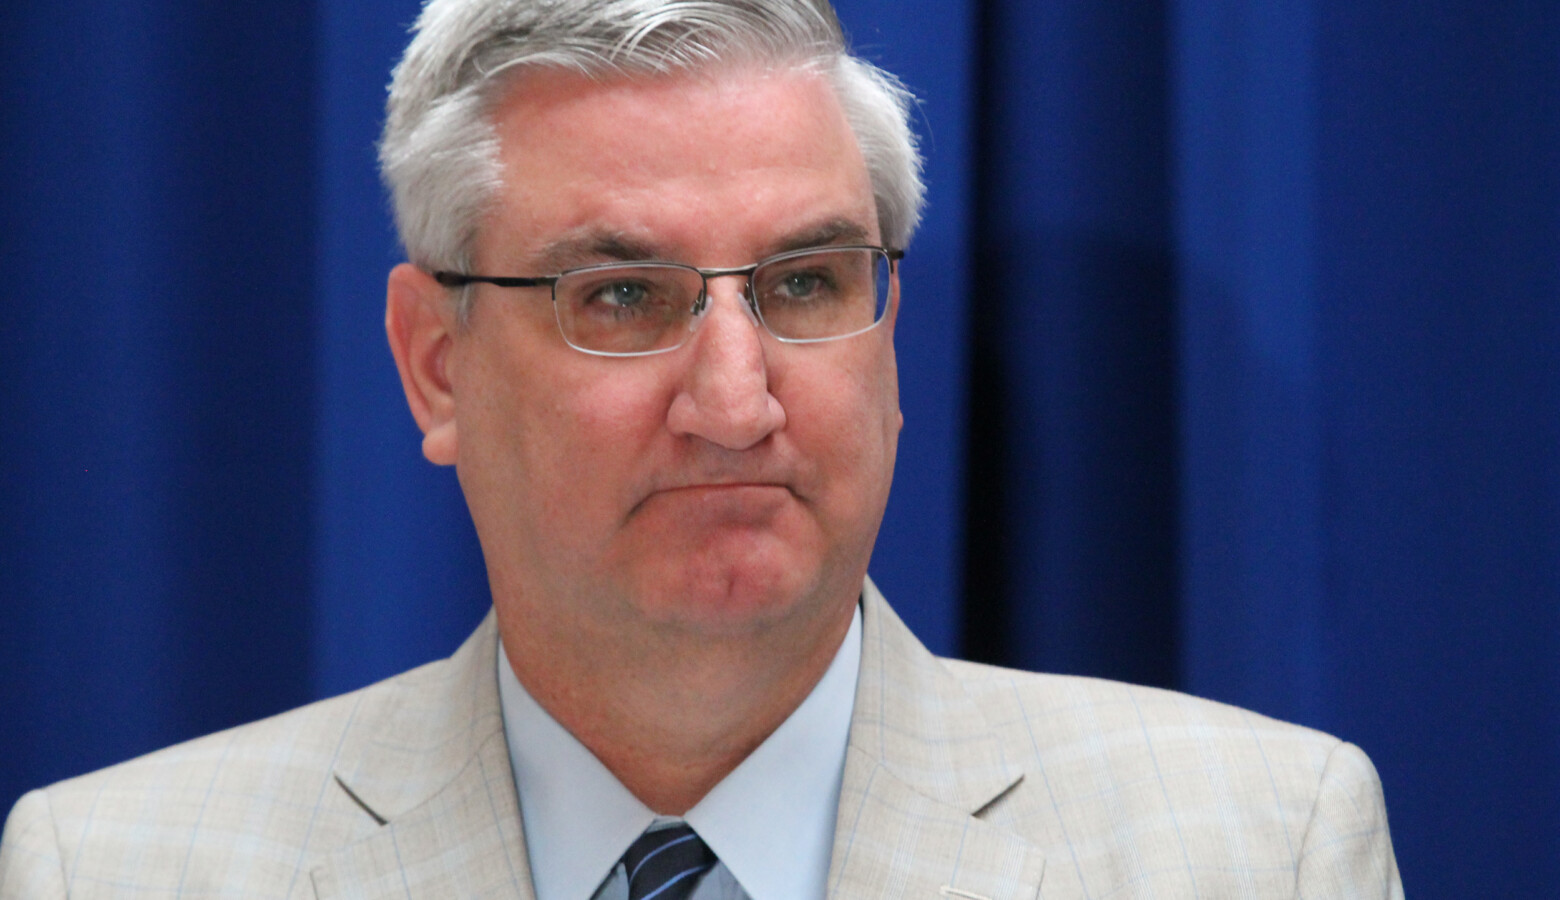 Several bills on the move during the 2021 legislative session are reactions to executive orders issued by Gov. Eric Holcomb during the COVID-19 pandemic. (Lauren Chapman/IPB News)